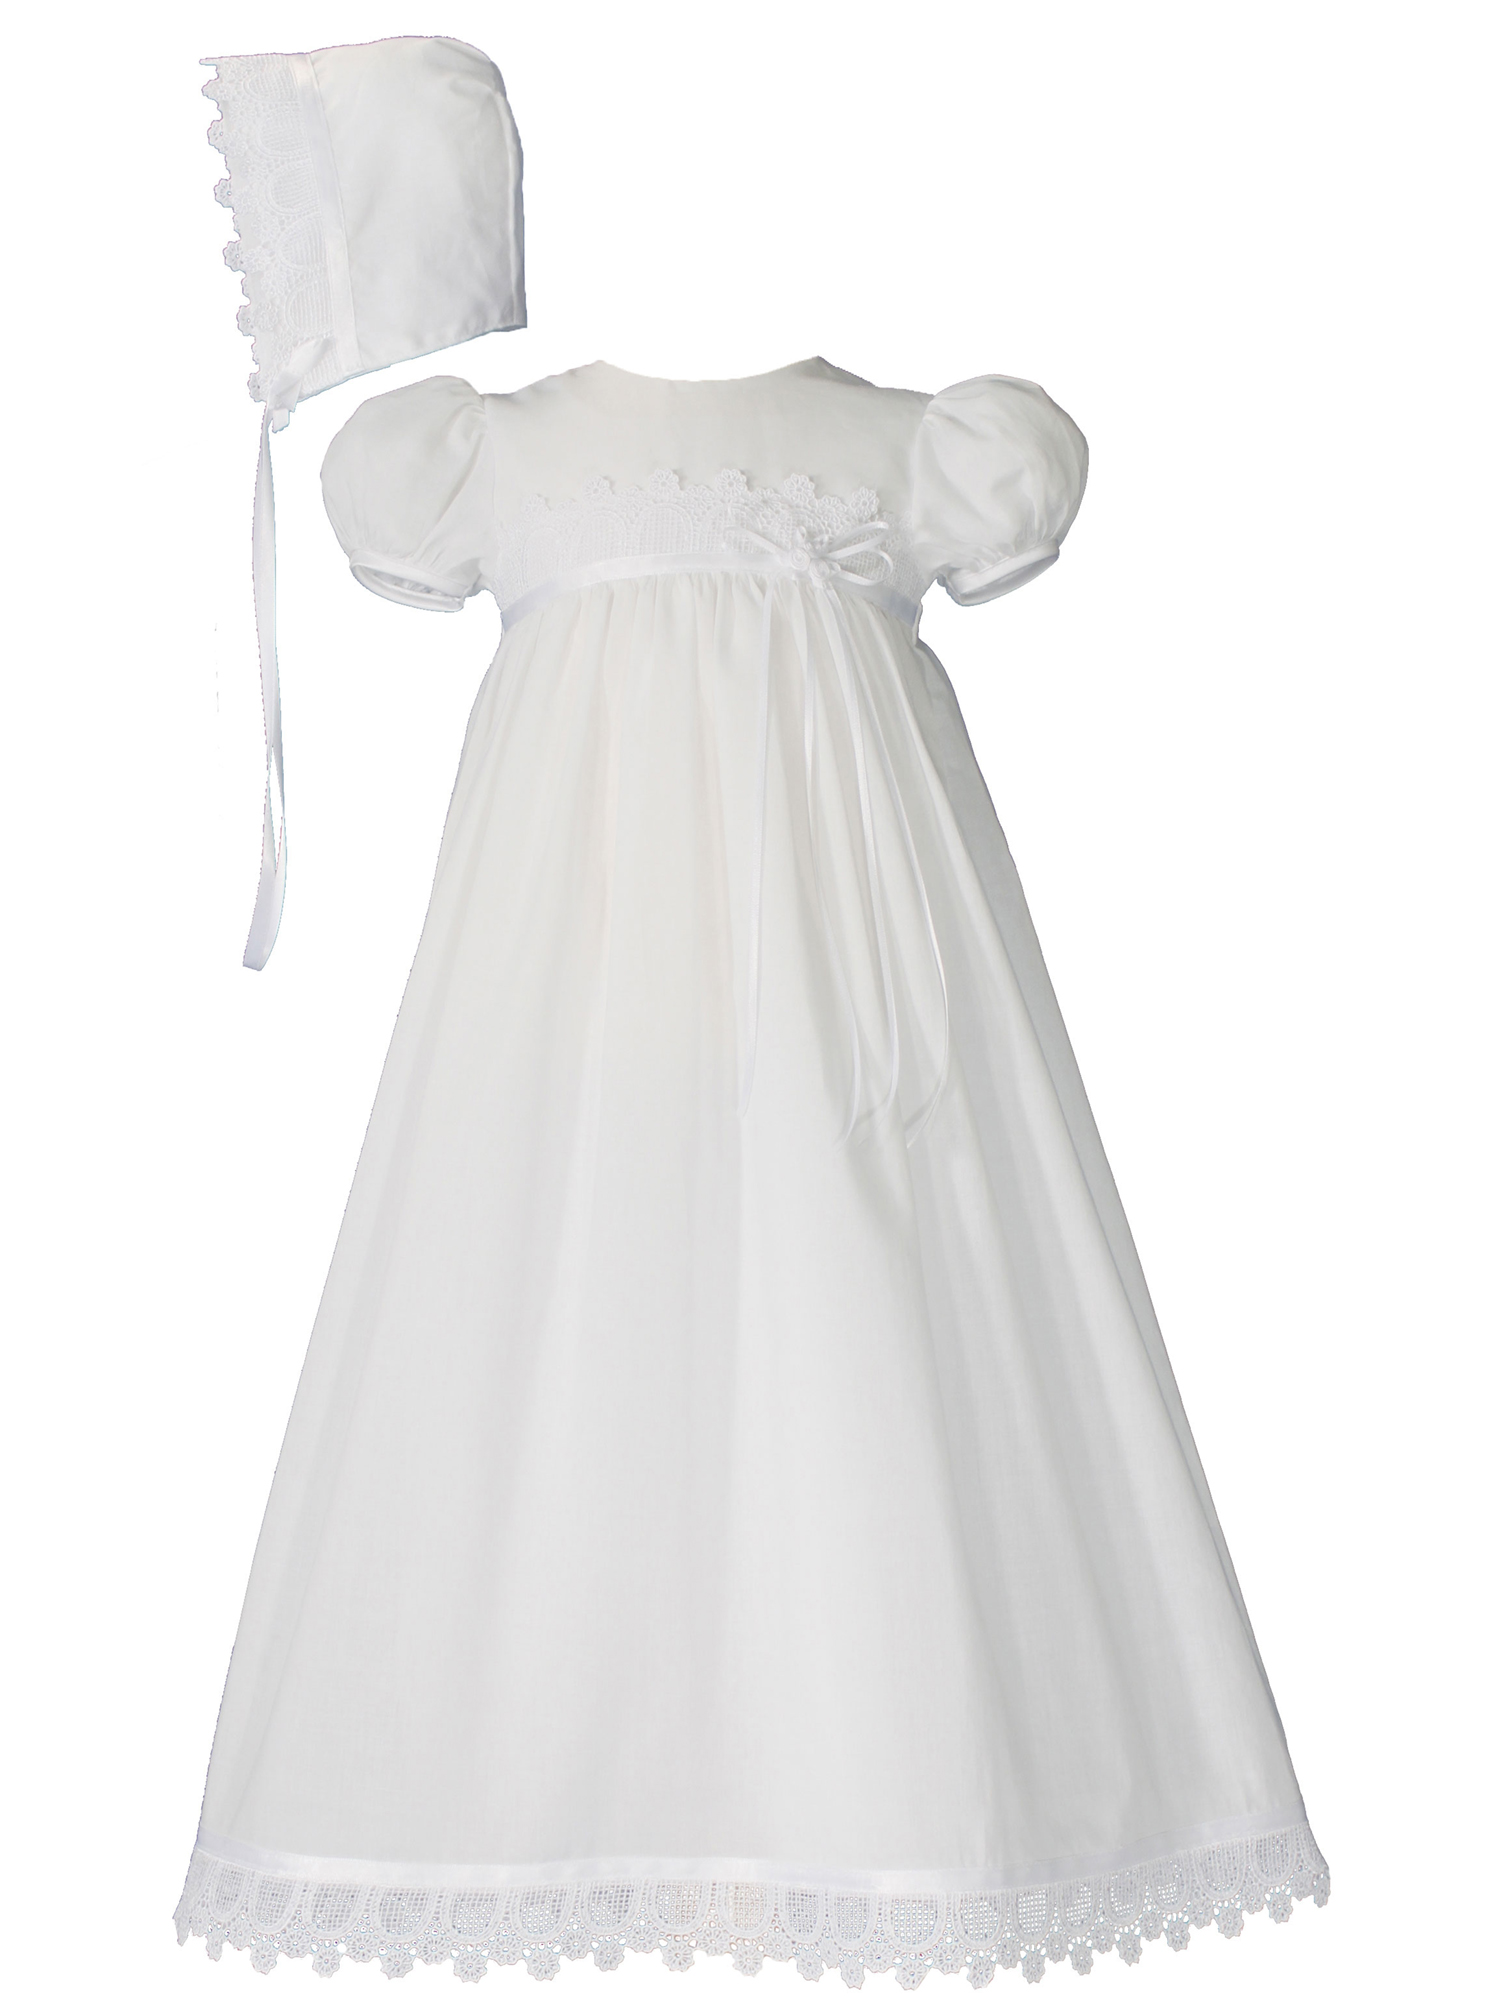 Little Things Mean A Lot 100% Cotton Handmade Girls Christening Special Occasion Dress with Italian Lace